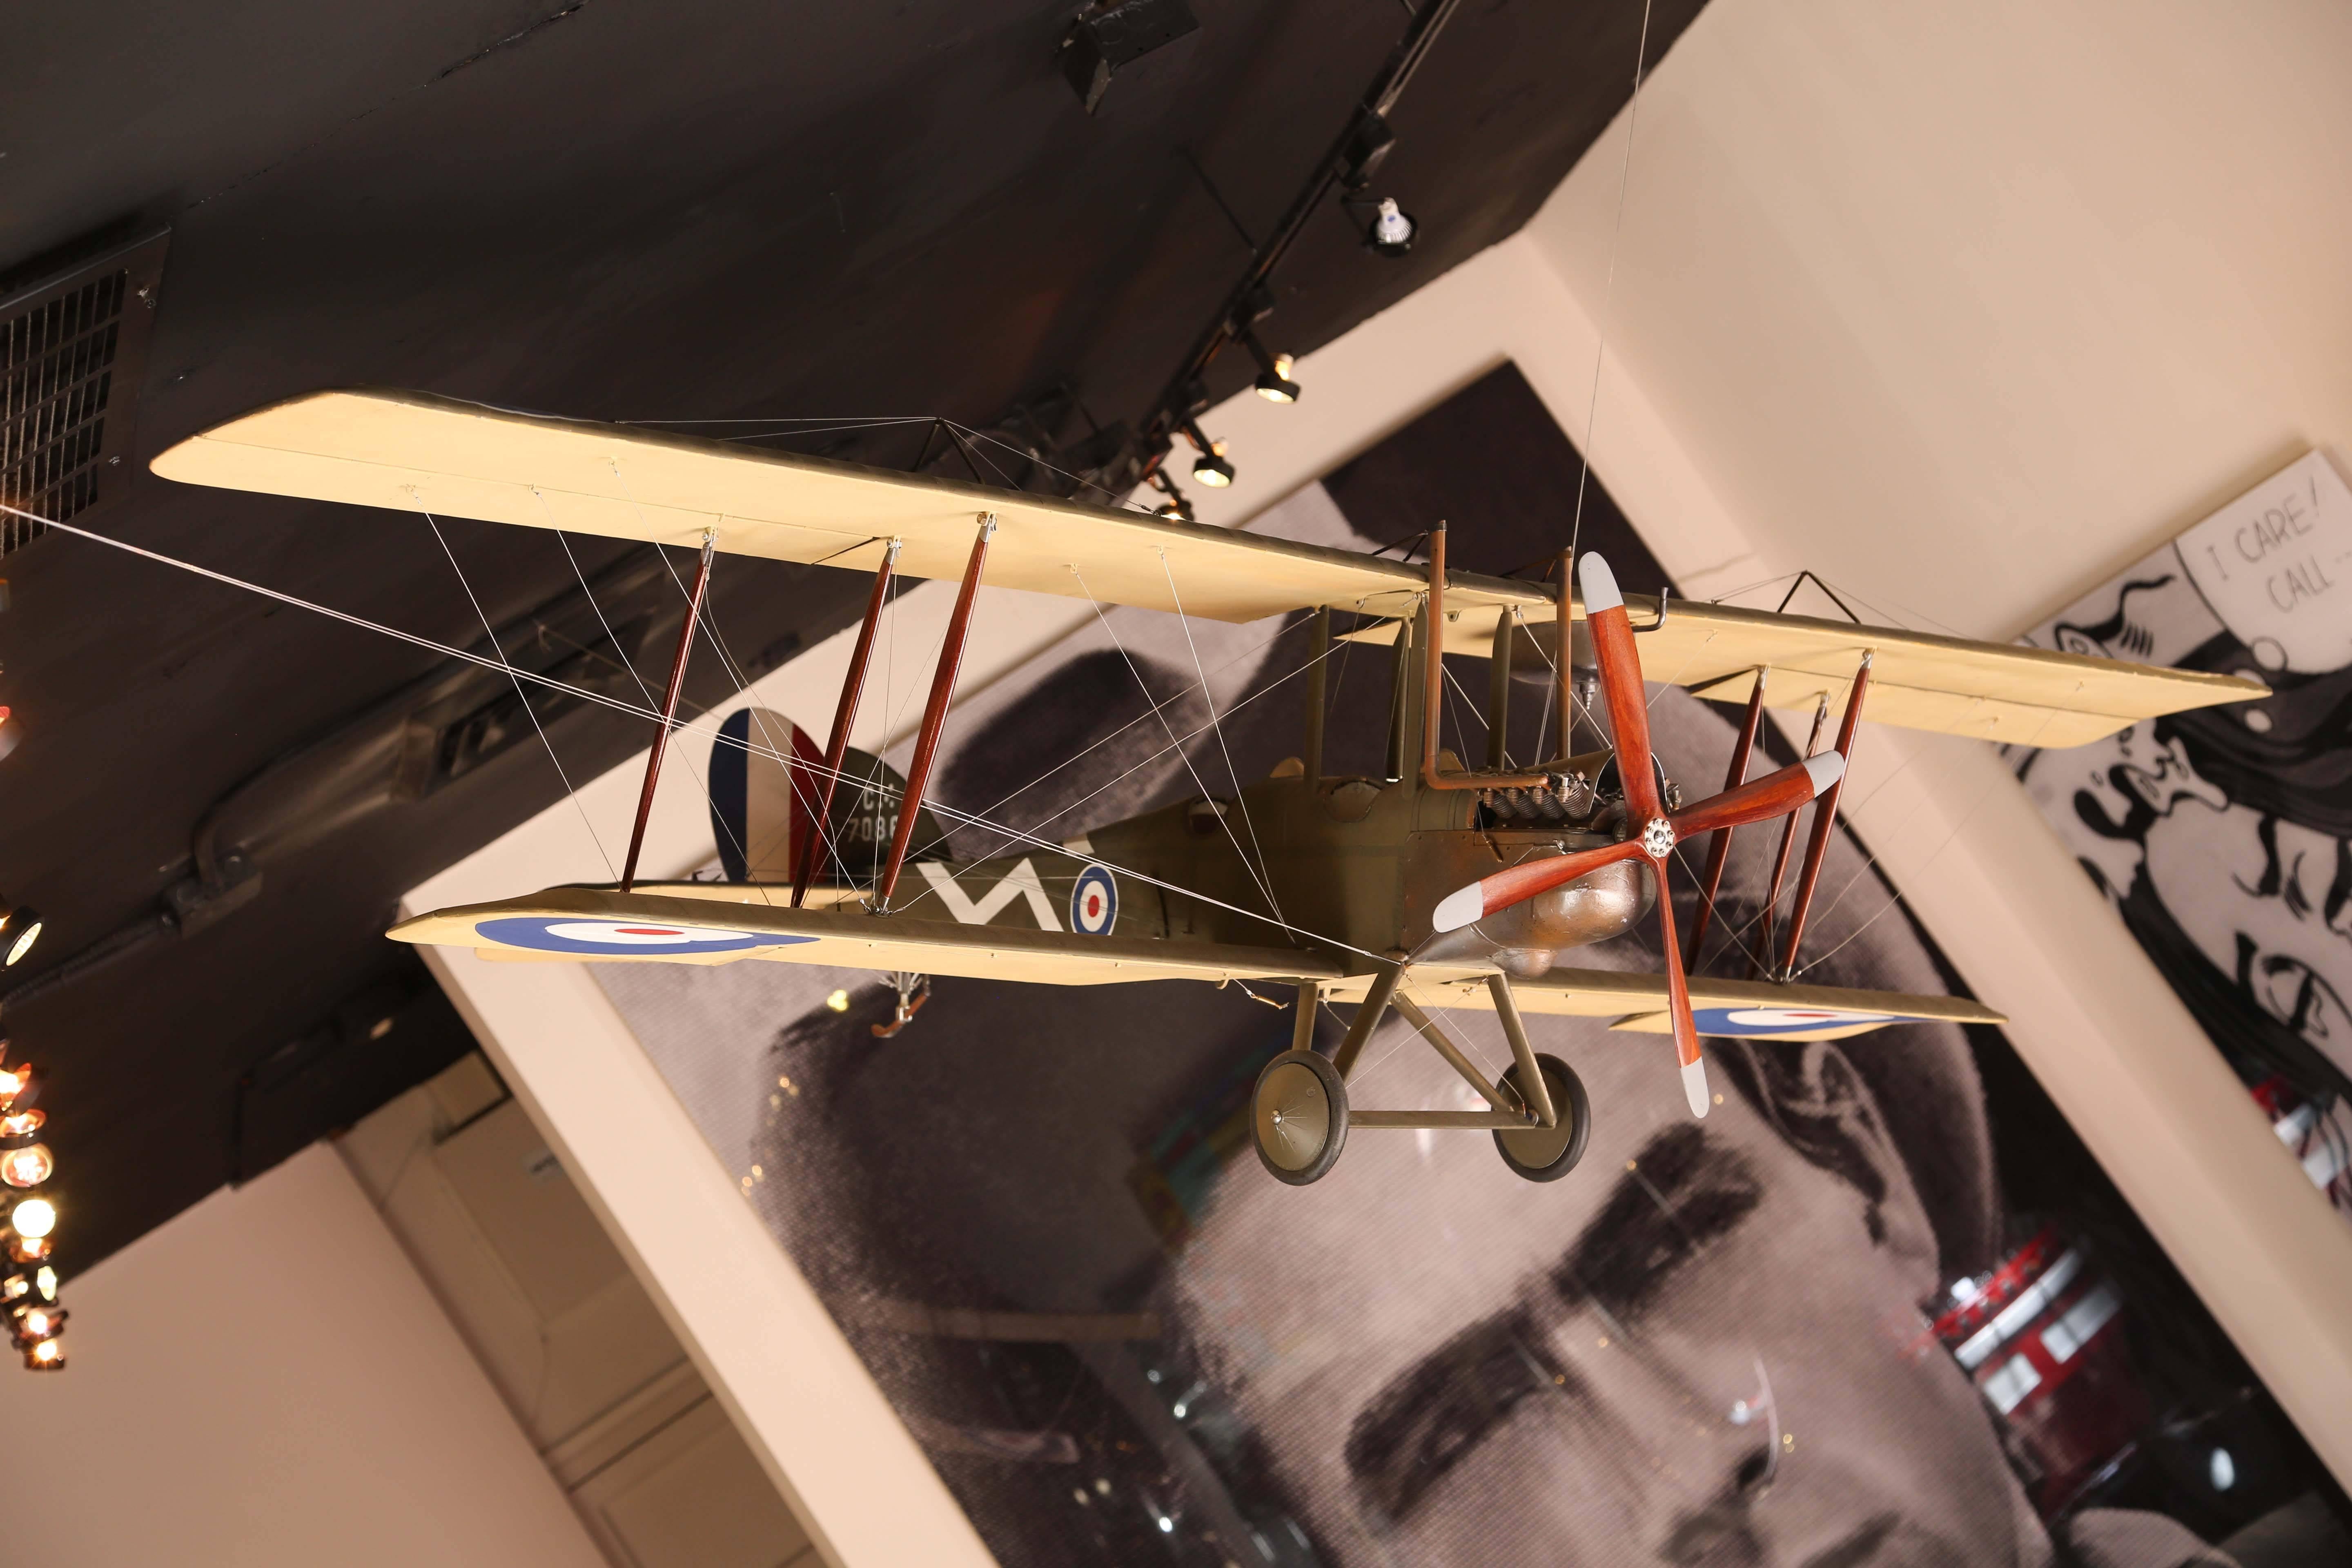 This is a large and exquisite hand-built model of a Royal Aircraft Factory BE2e variant airplane model. 

The model was hand-built in the Mid-Century and features a beautiful carved engine. This model was acquired in Europe and is a wonderful